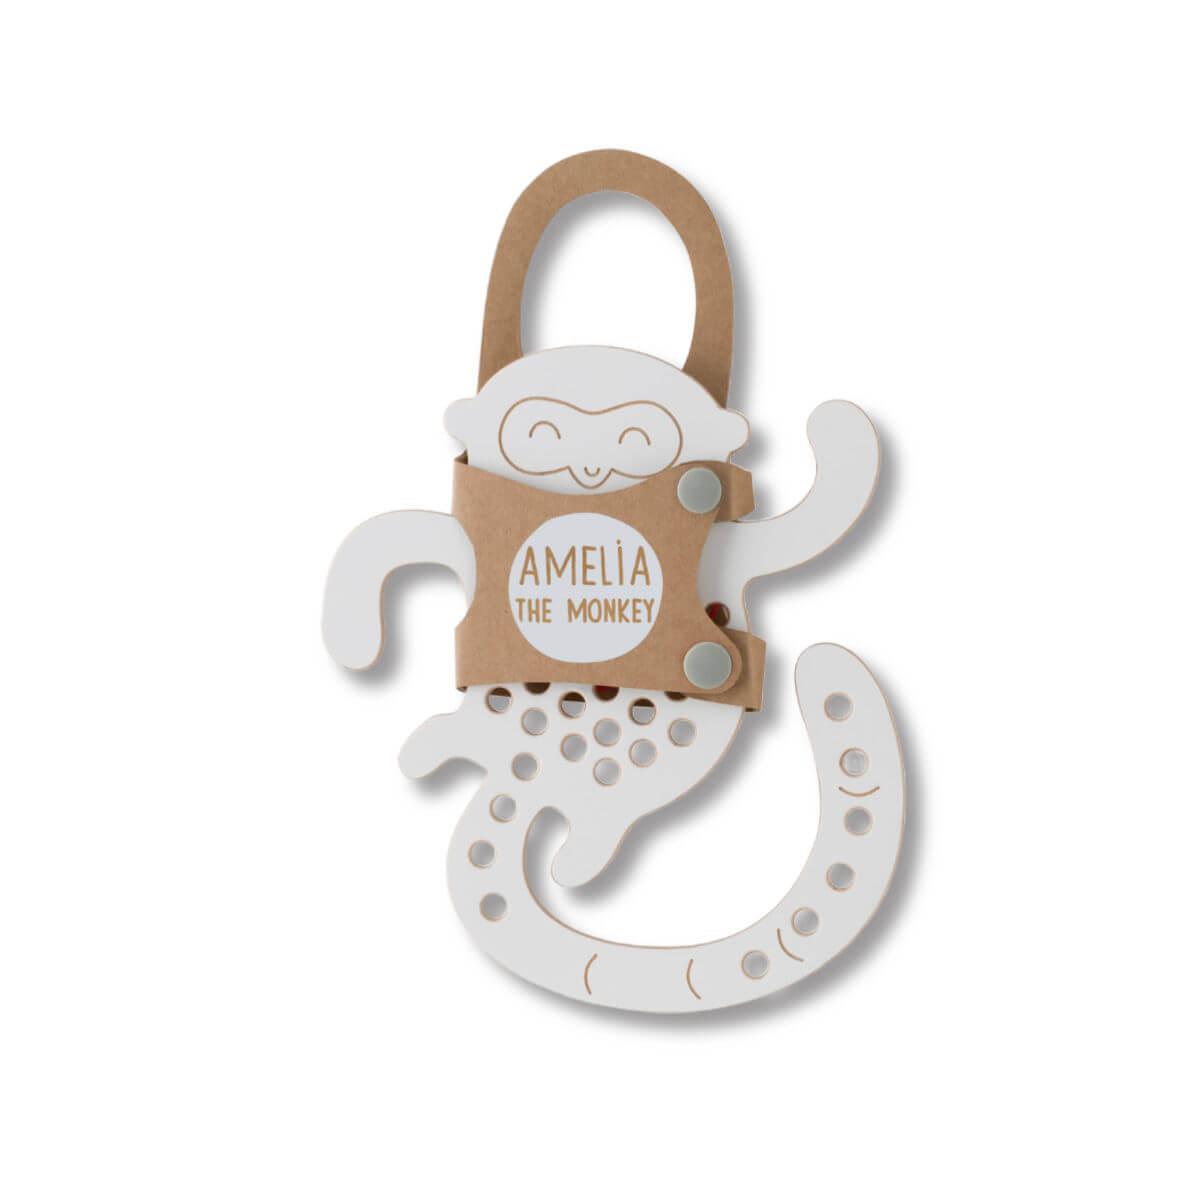 milin toys wooden lacing toy amelia the monkey